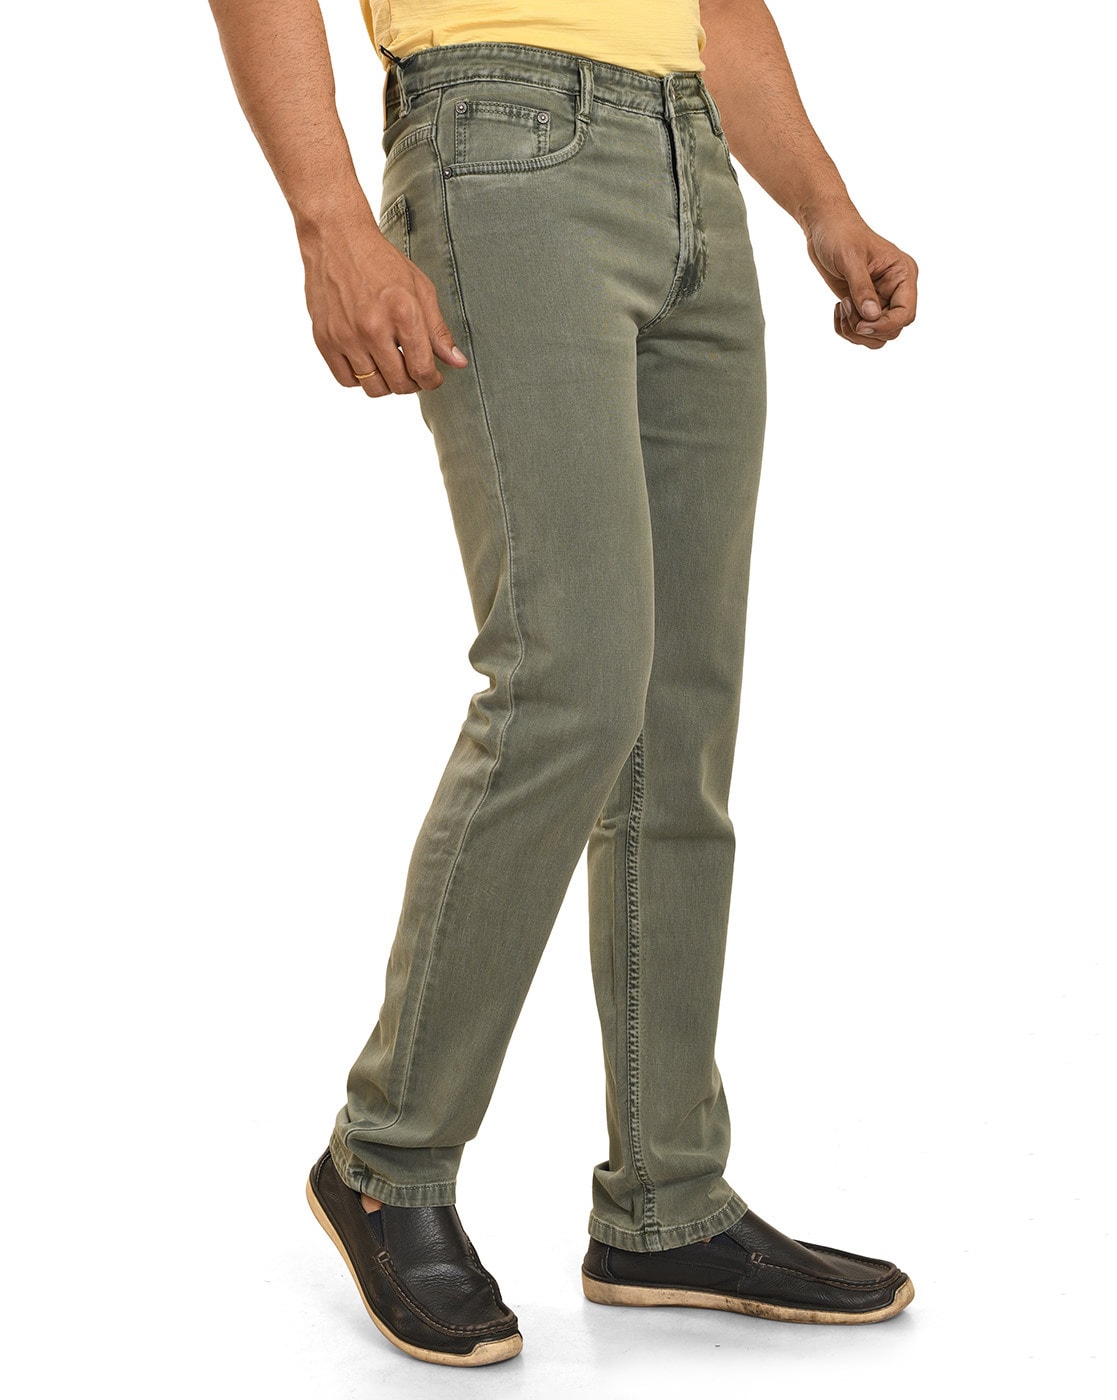 Buy Women Straight Trouser Pista Green Solid Cotton for Best Price,  Reviews, Free Shipping